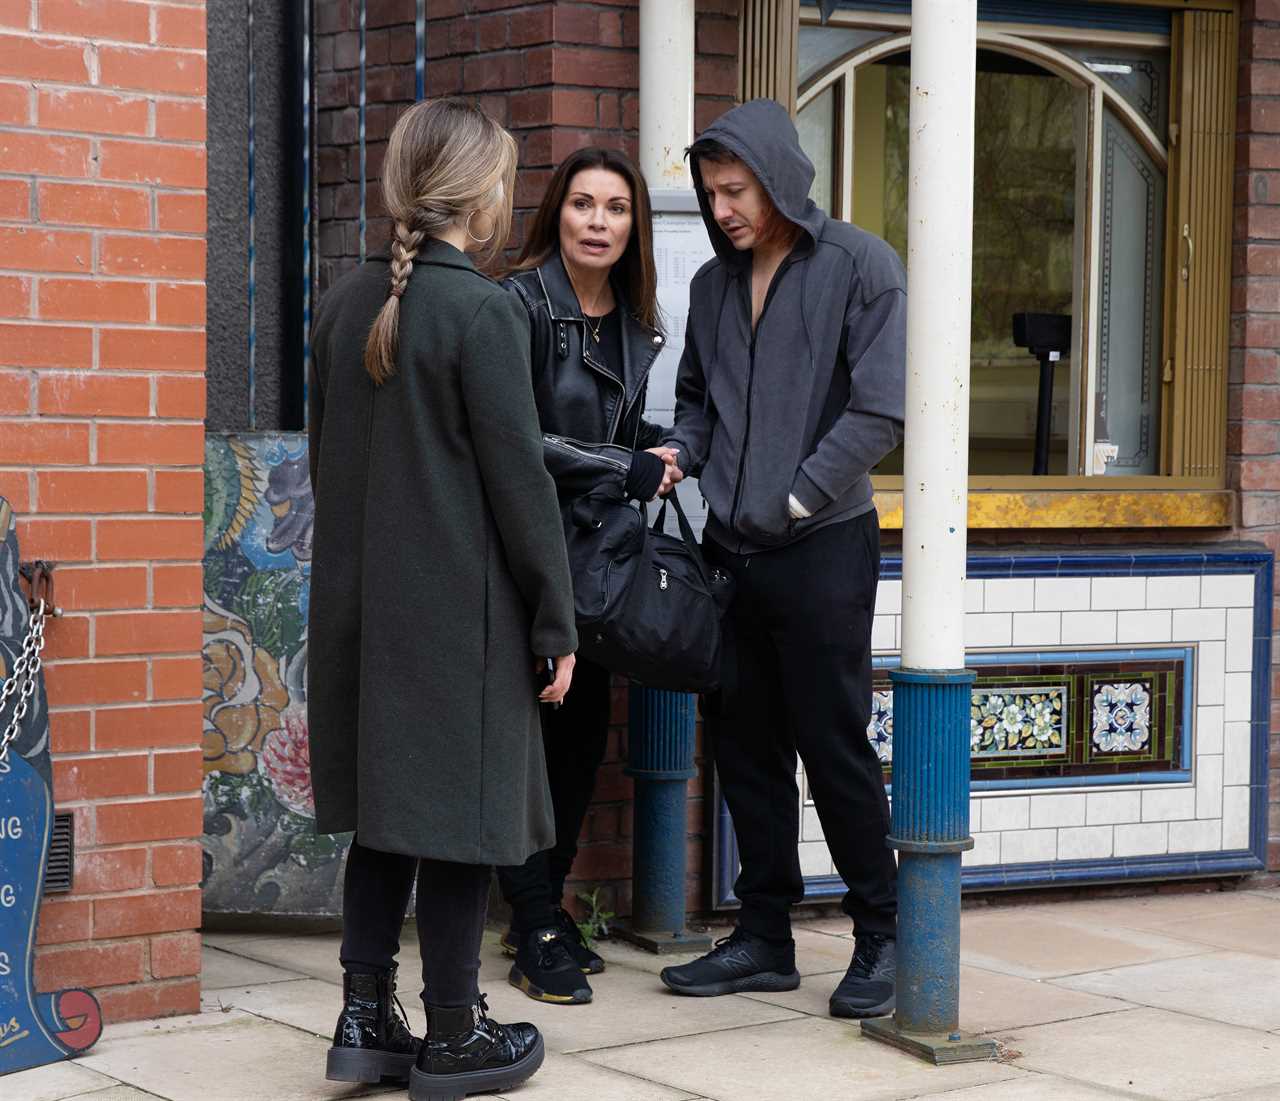 Ryan Connor gets tragic news after acid attack in Coronation Street